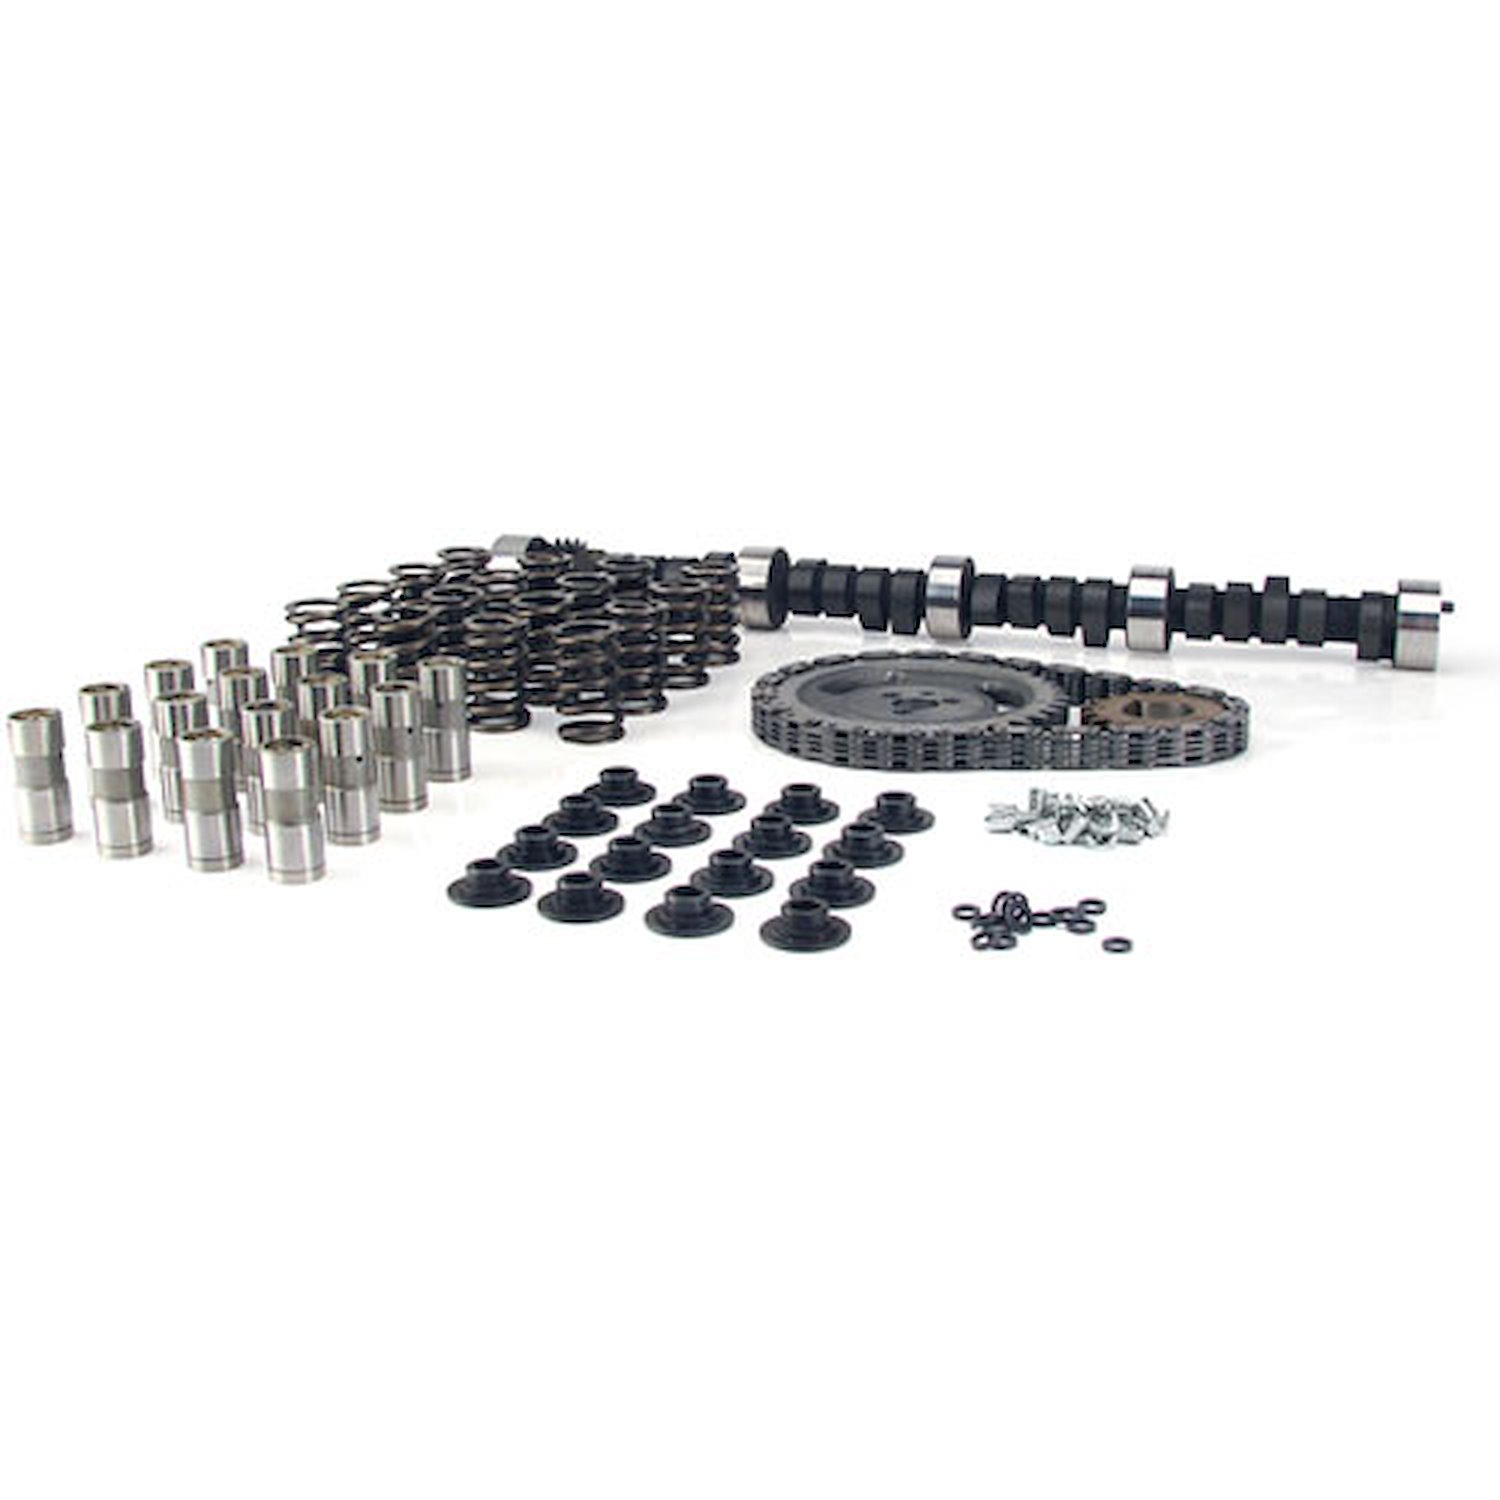 Xtreme Energy 274H Hydraulic Flat Tappet Camshaft Complete Kit Lift: .490"/.490" Duration: 274°/286° RPM Range: 1800-6000